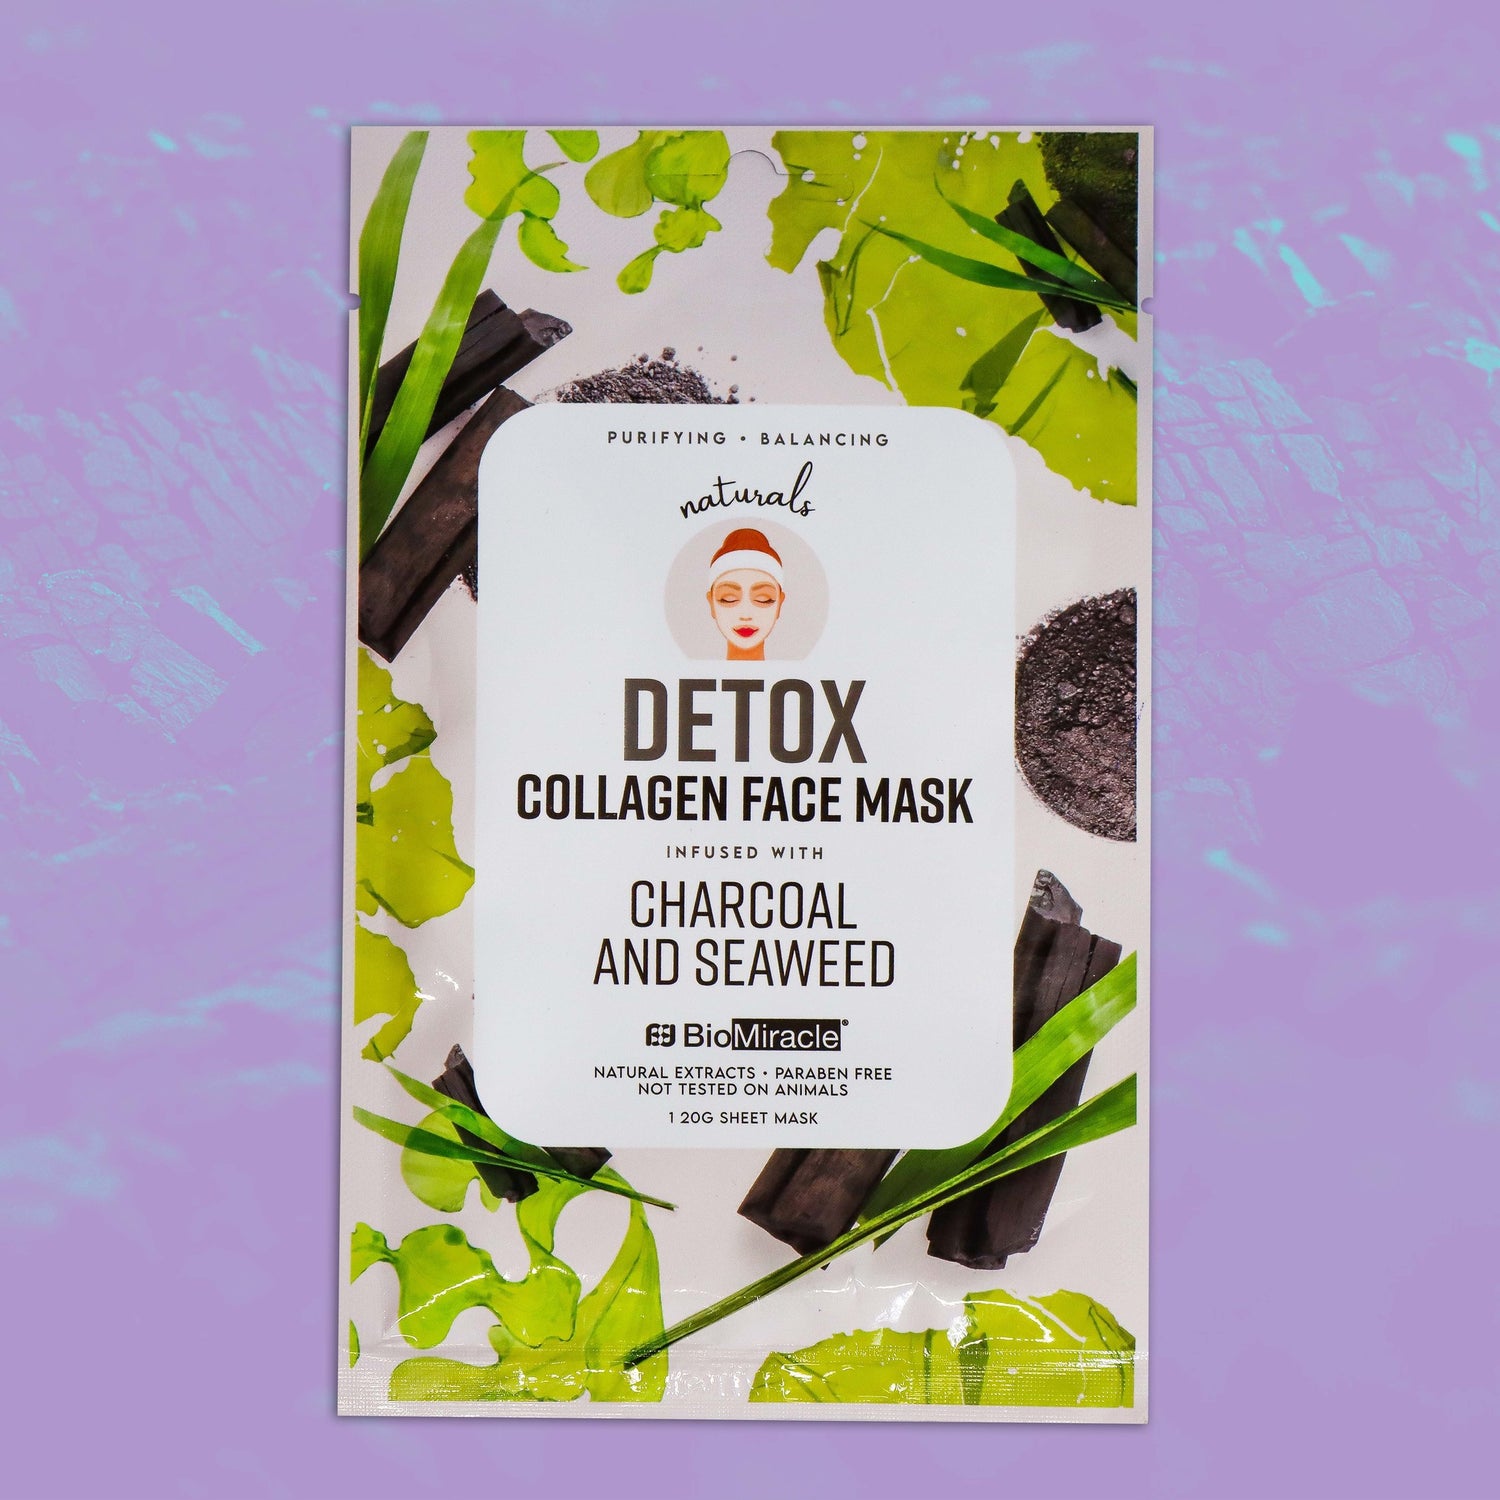 Detox Collagen Face Mask Infused with Charcoal and Seaweed 10 Pack